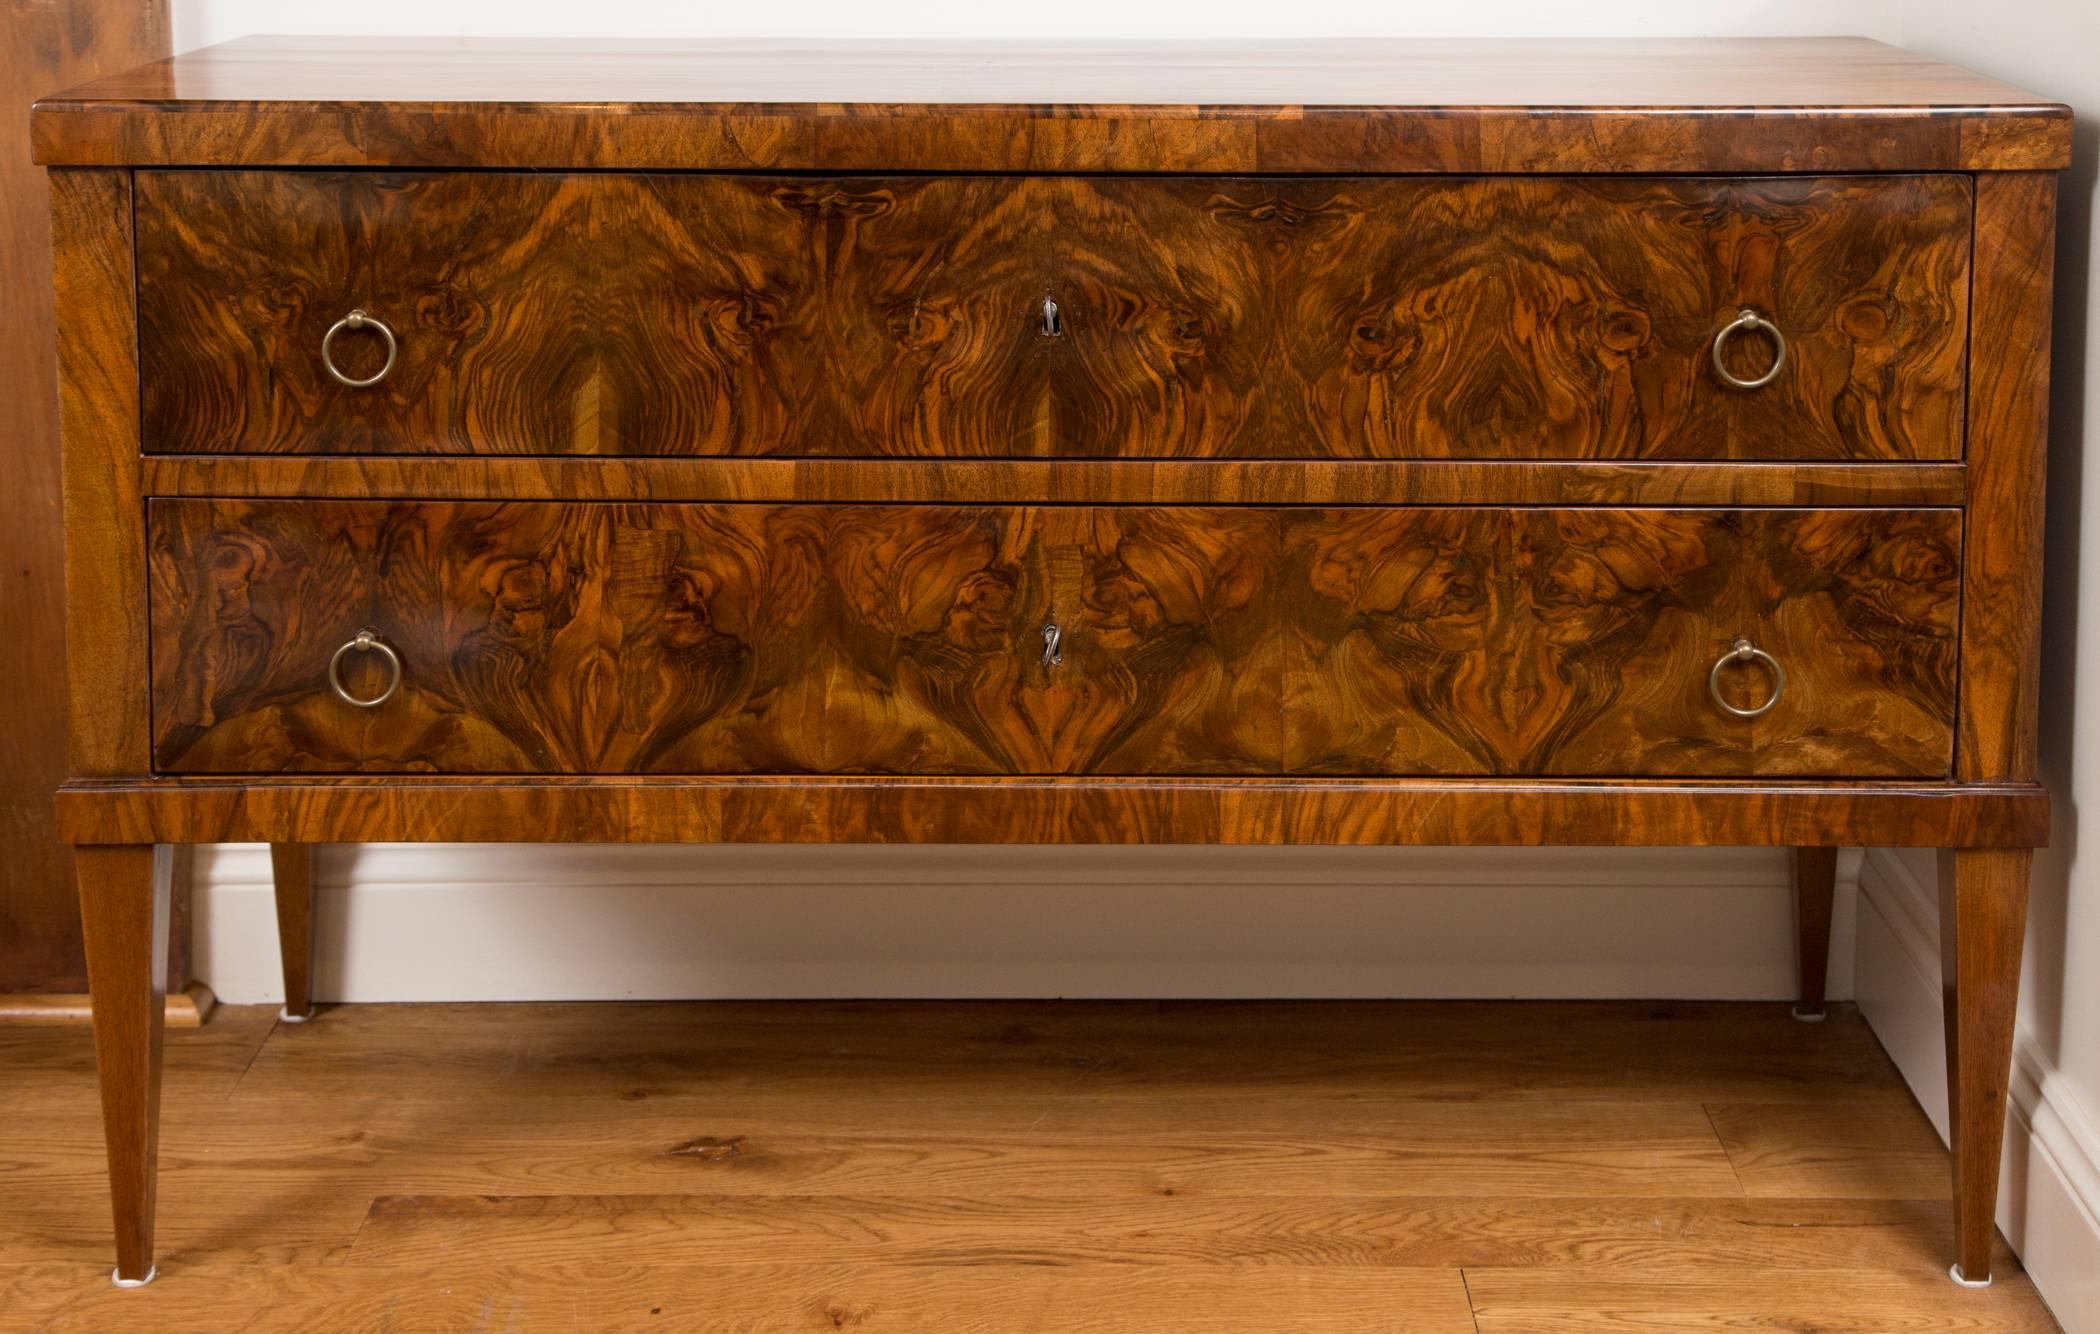 Pair of large Biedermeier chests comprised of two long drawers with brass pulls finishing on high tapered legs,  bookmatched burl walnut veneer on pine,  refurbished and French polished.
 
 